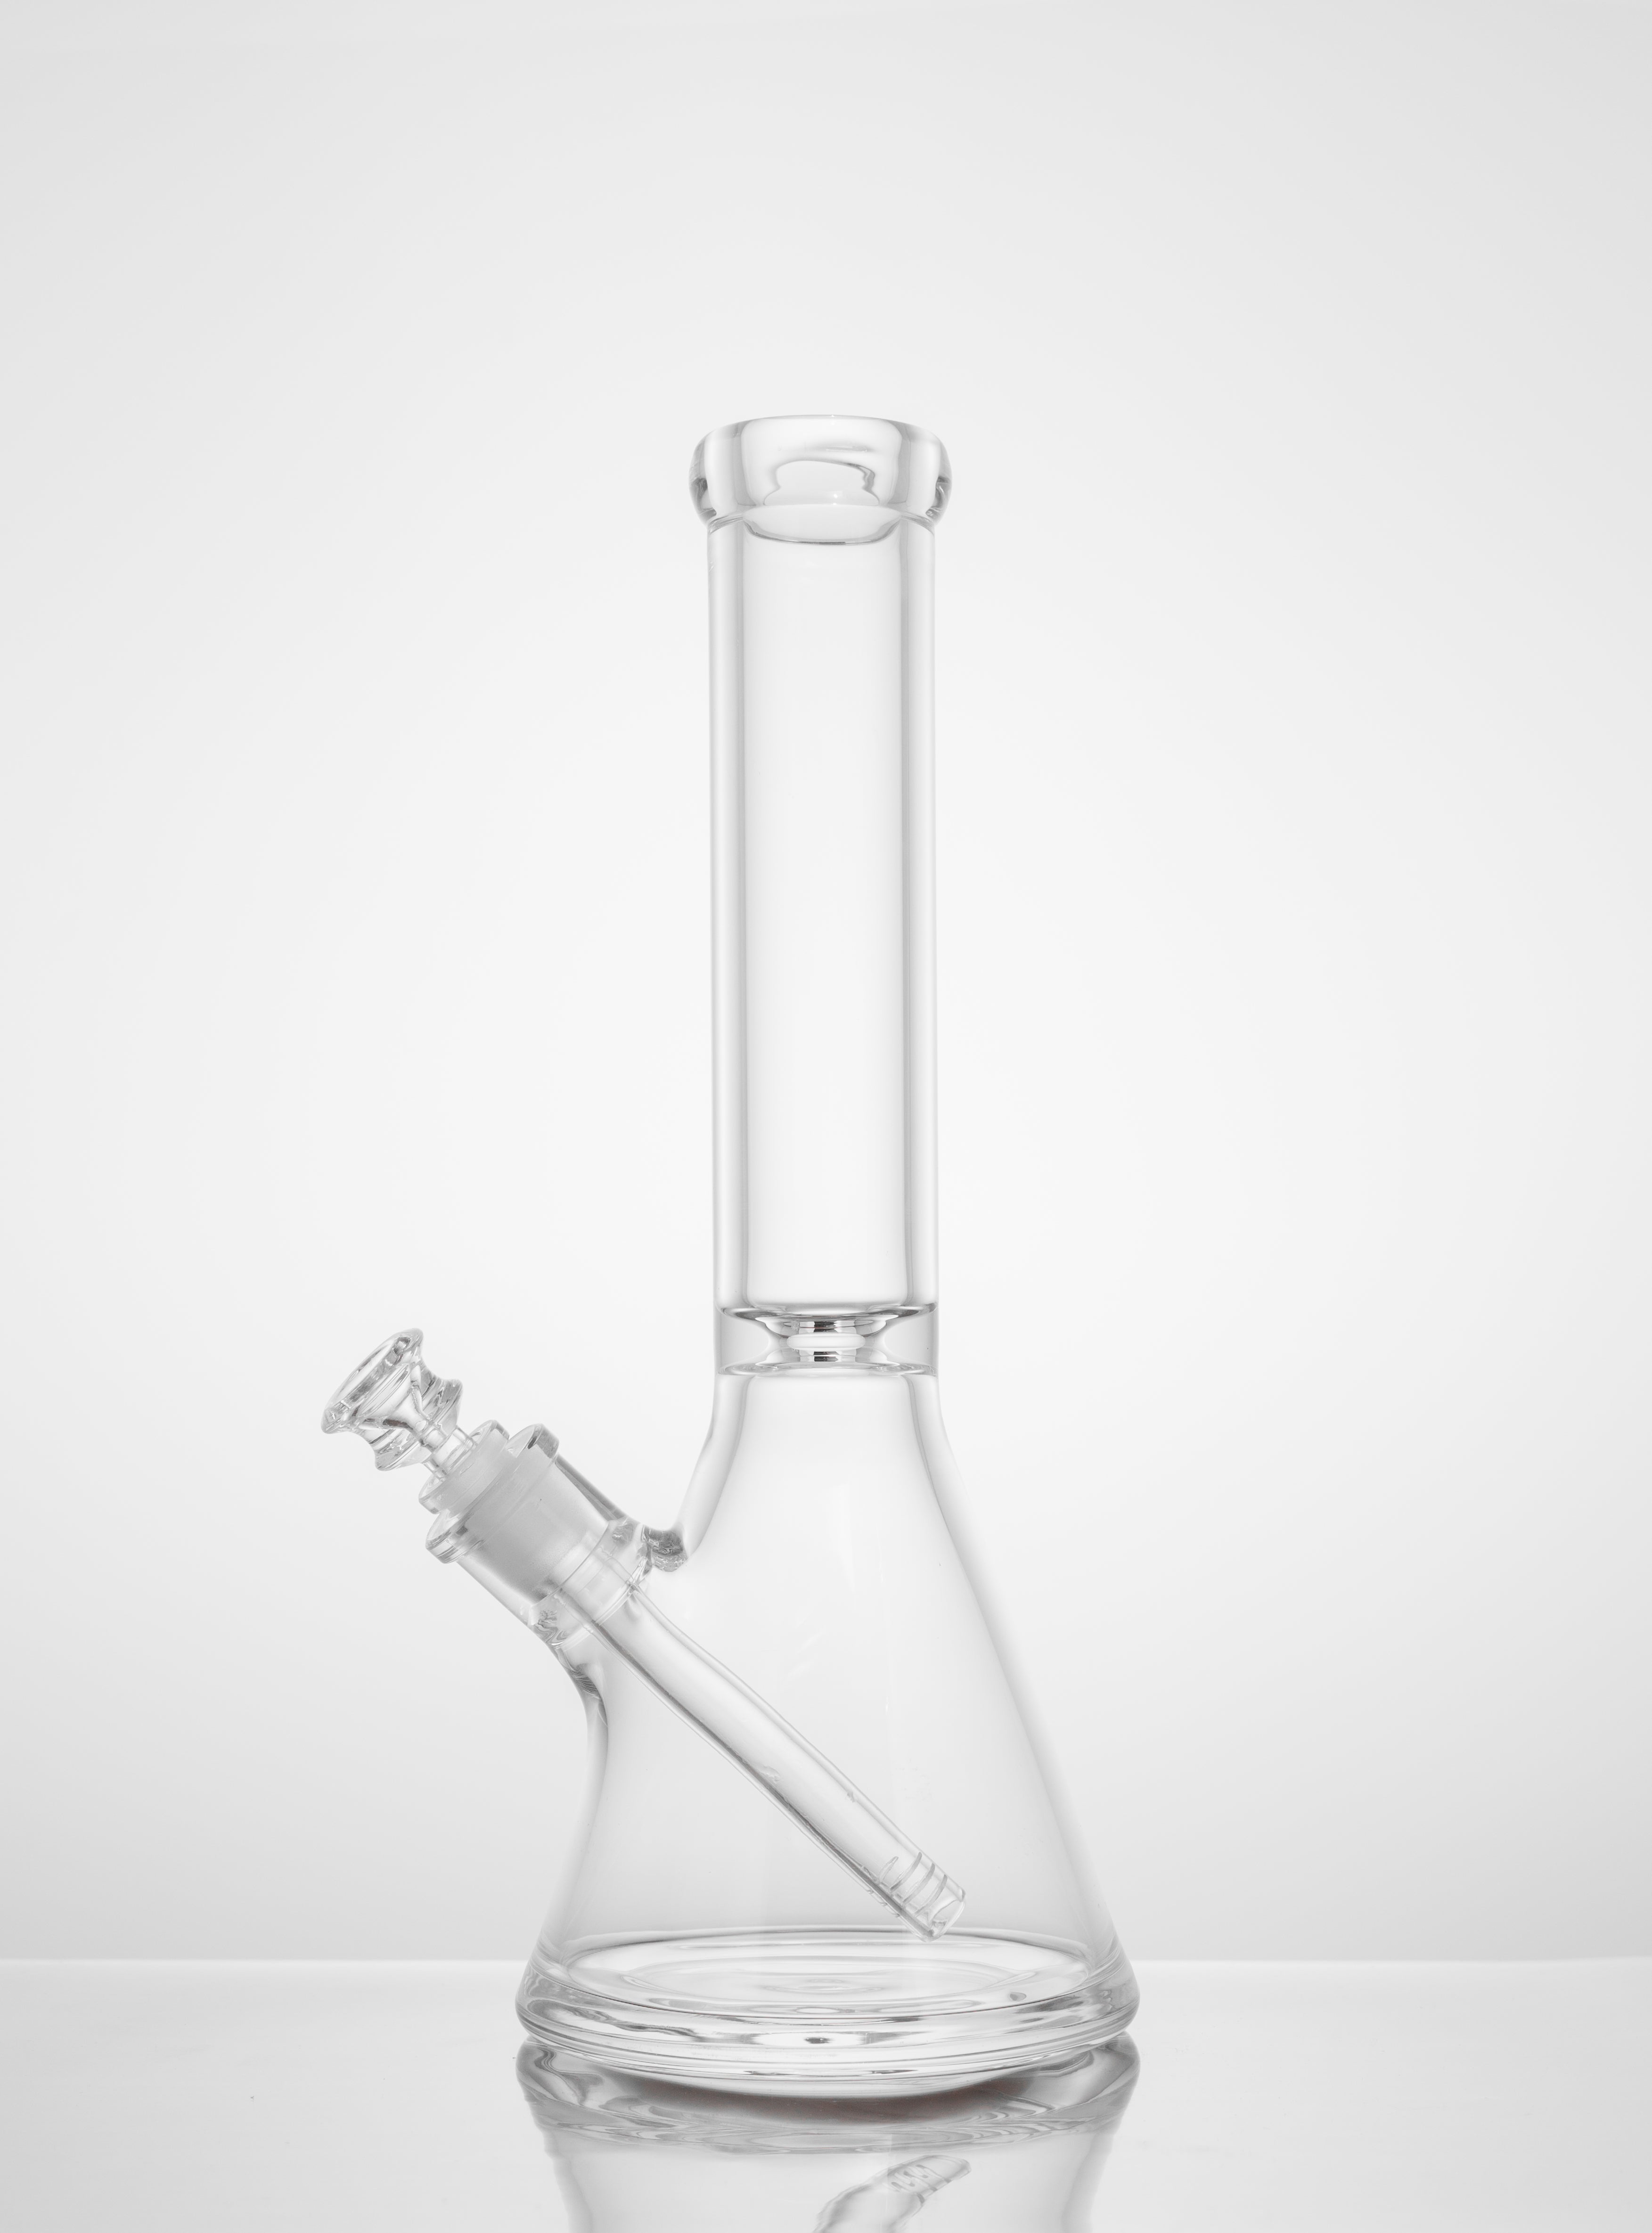 15mm Thick Glass Beaker Bong - 14 inches